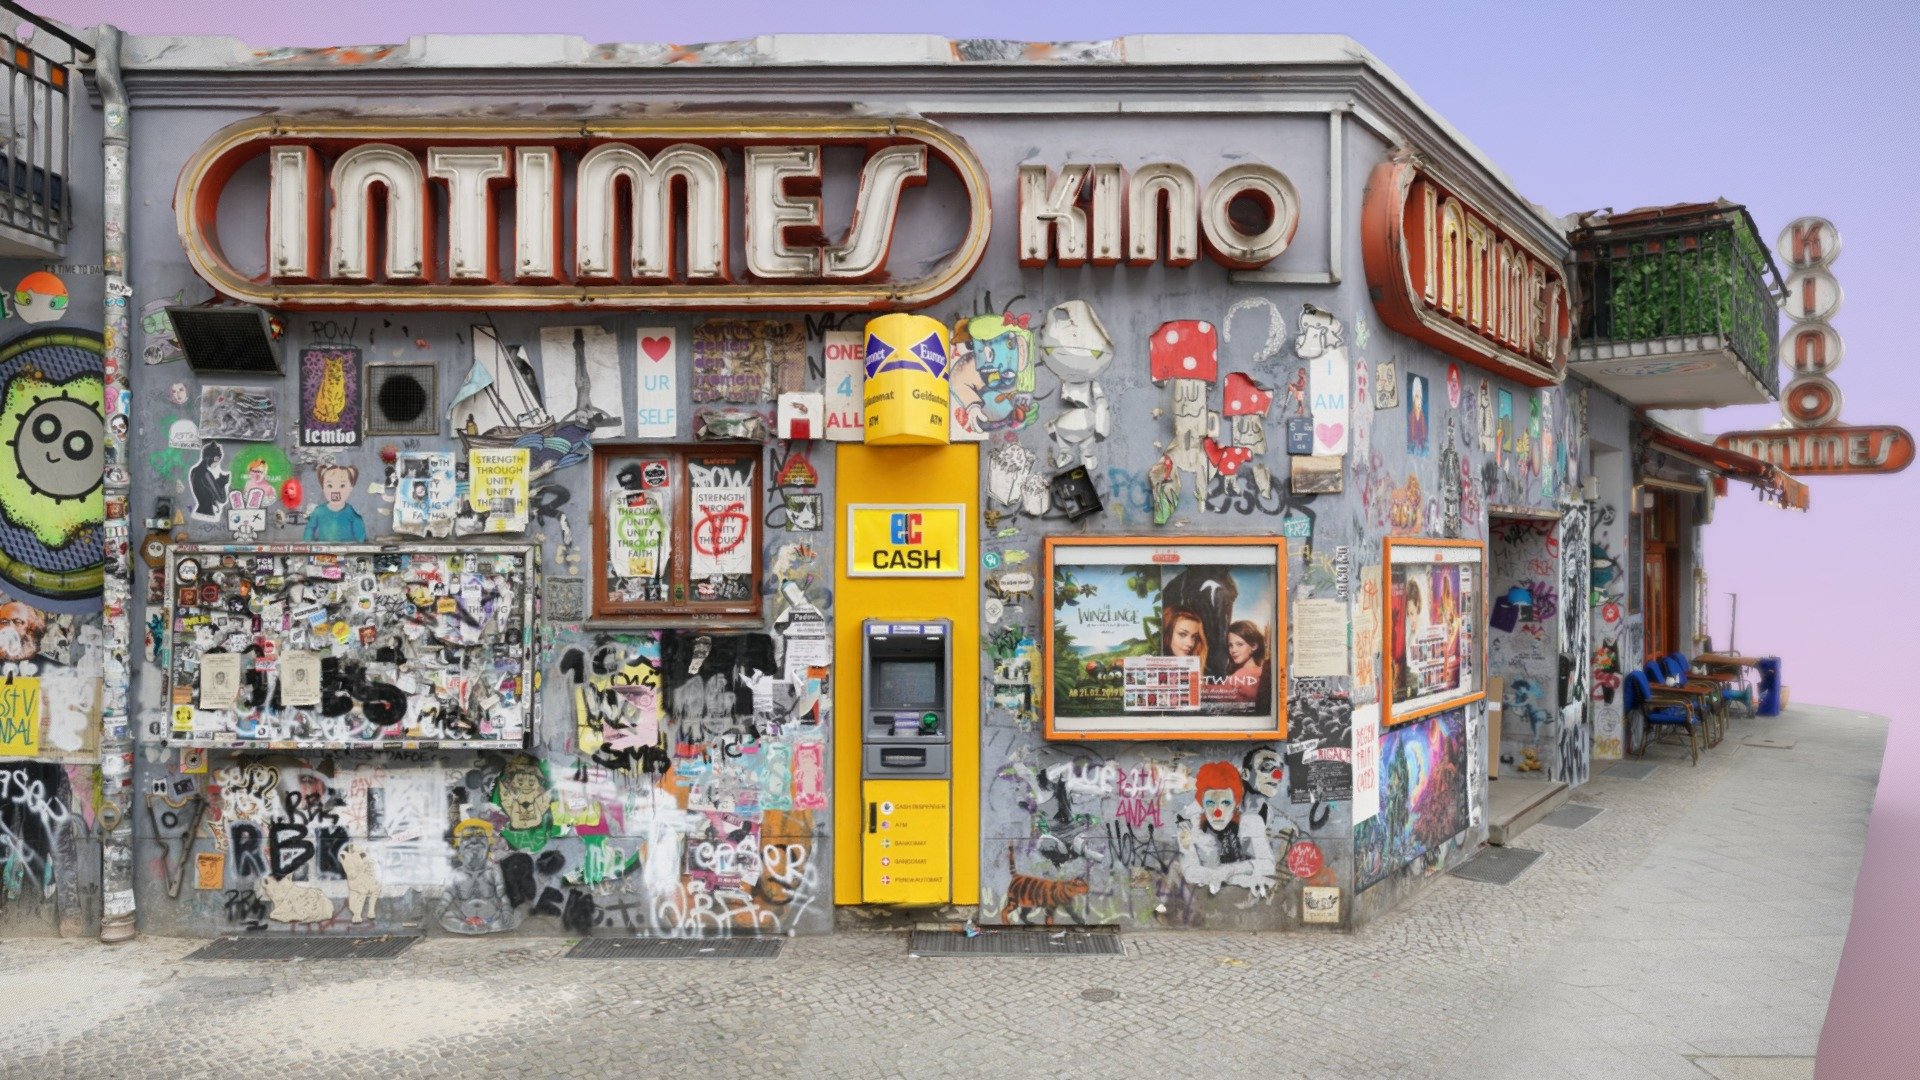 An interesting cinema and cafe entrance at the corner of Boxhanger Str. and Niederbarnimstraße of Berlin that features the &ldquo;Graffiti Wall of Fame